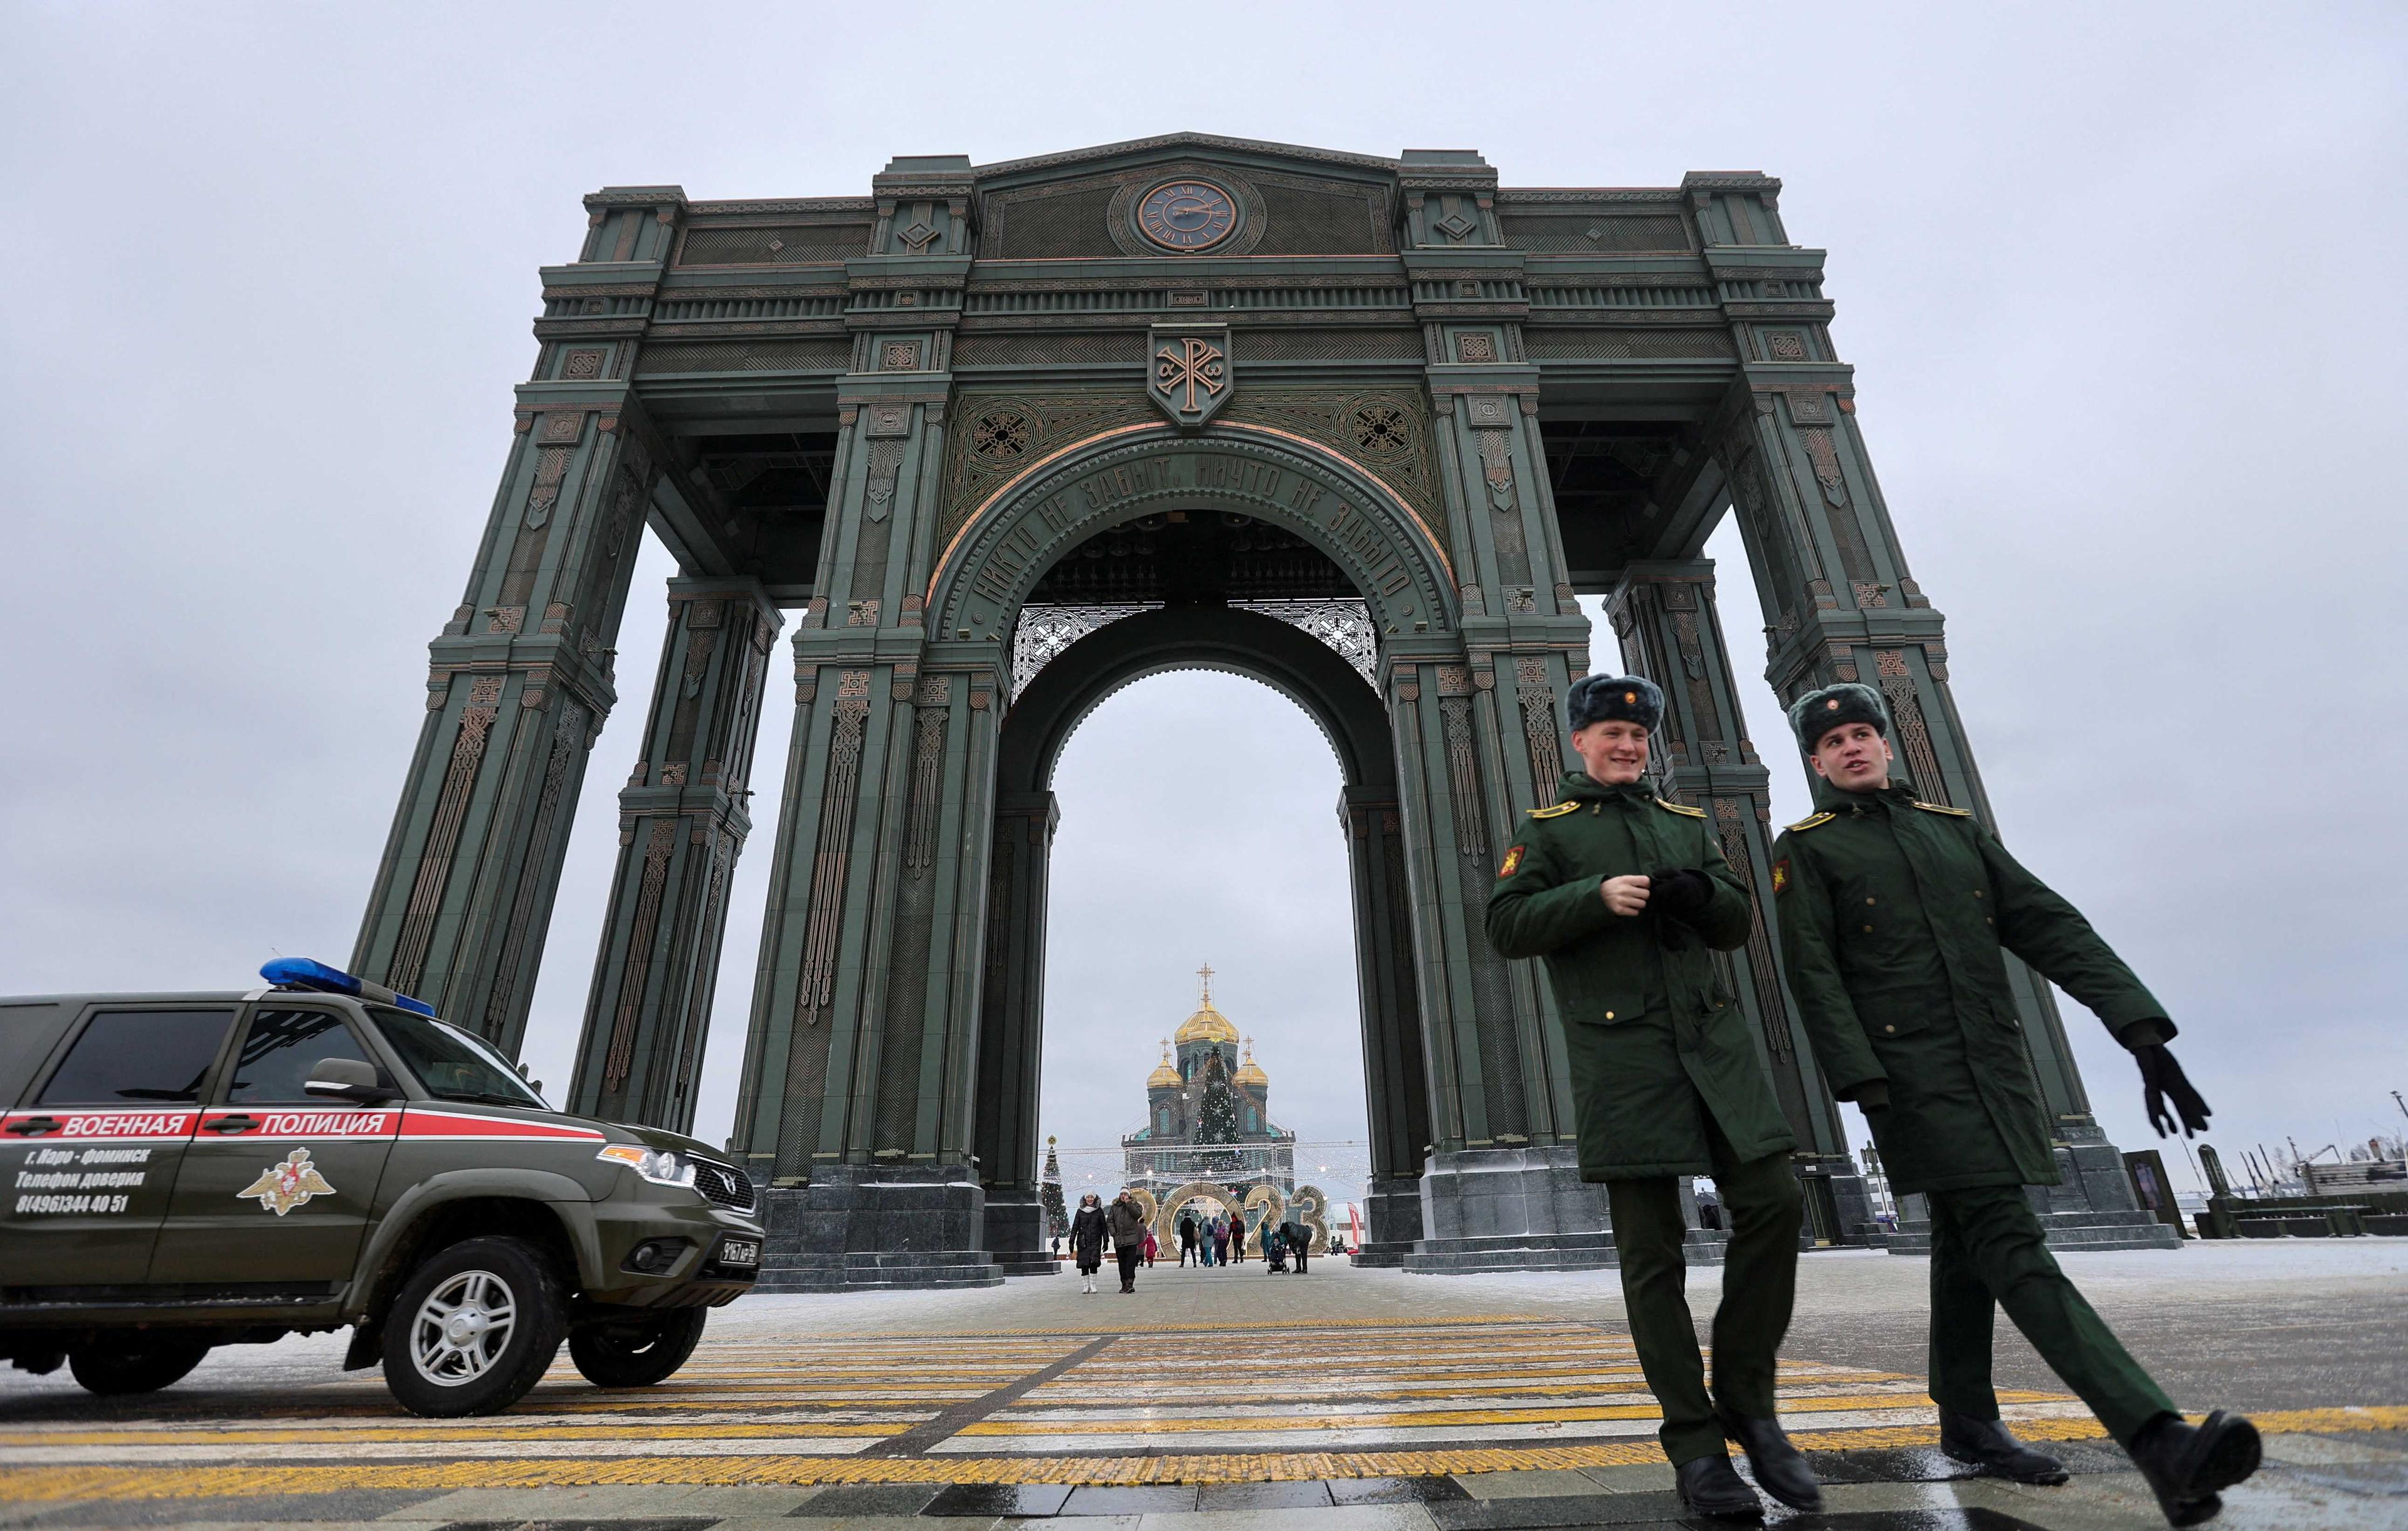 A view shows the Main Cathedral of the Russian Armed Forces near Moscow, Russia, Jan 15. Photo: Reuters